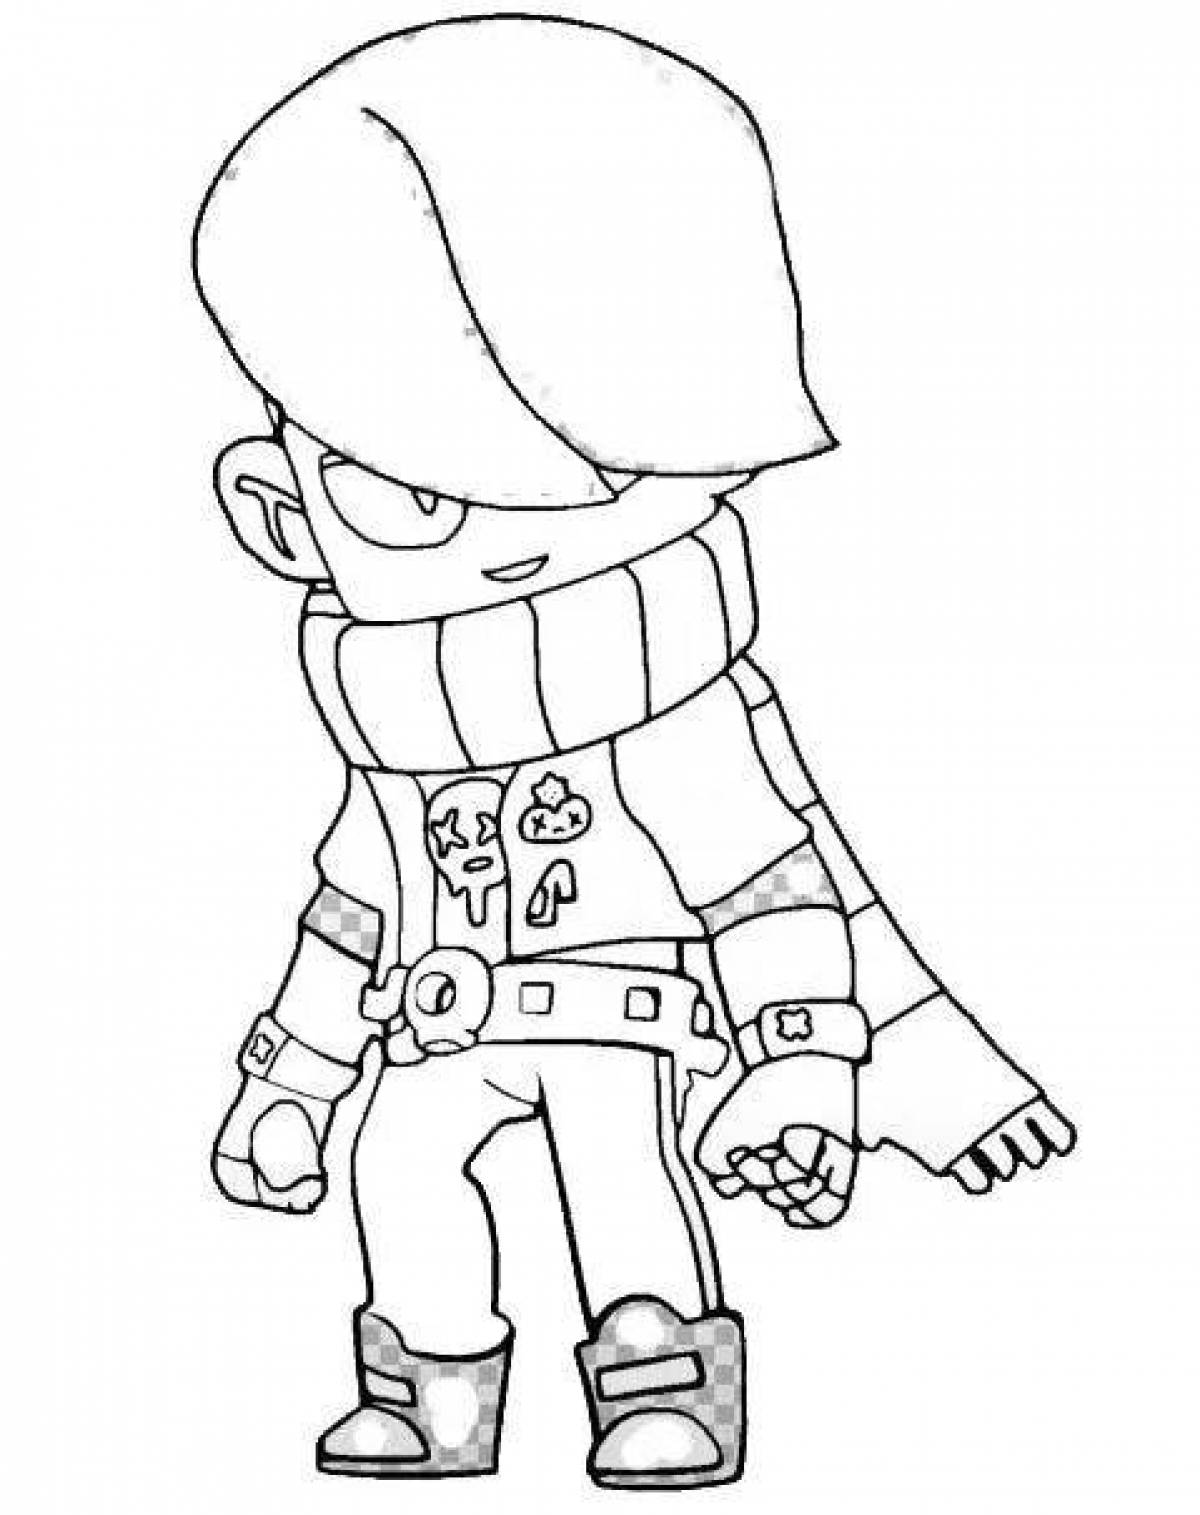 Exciting edgar brawl stars coloring page